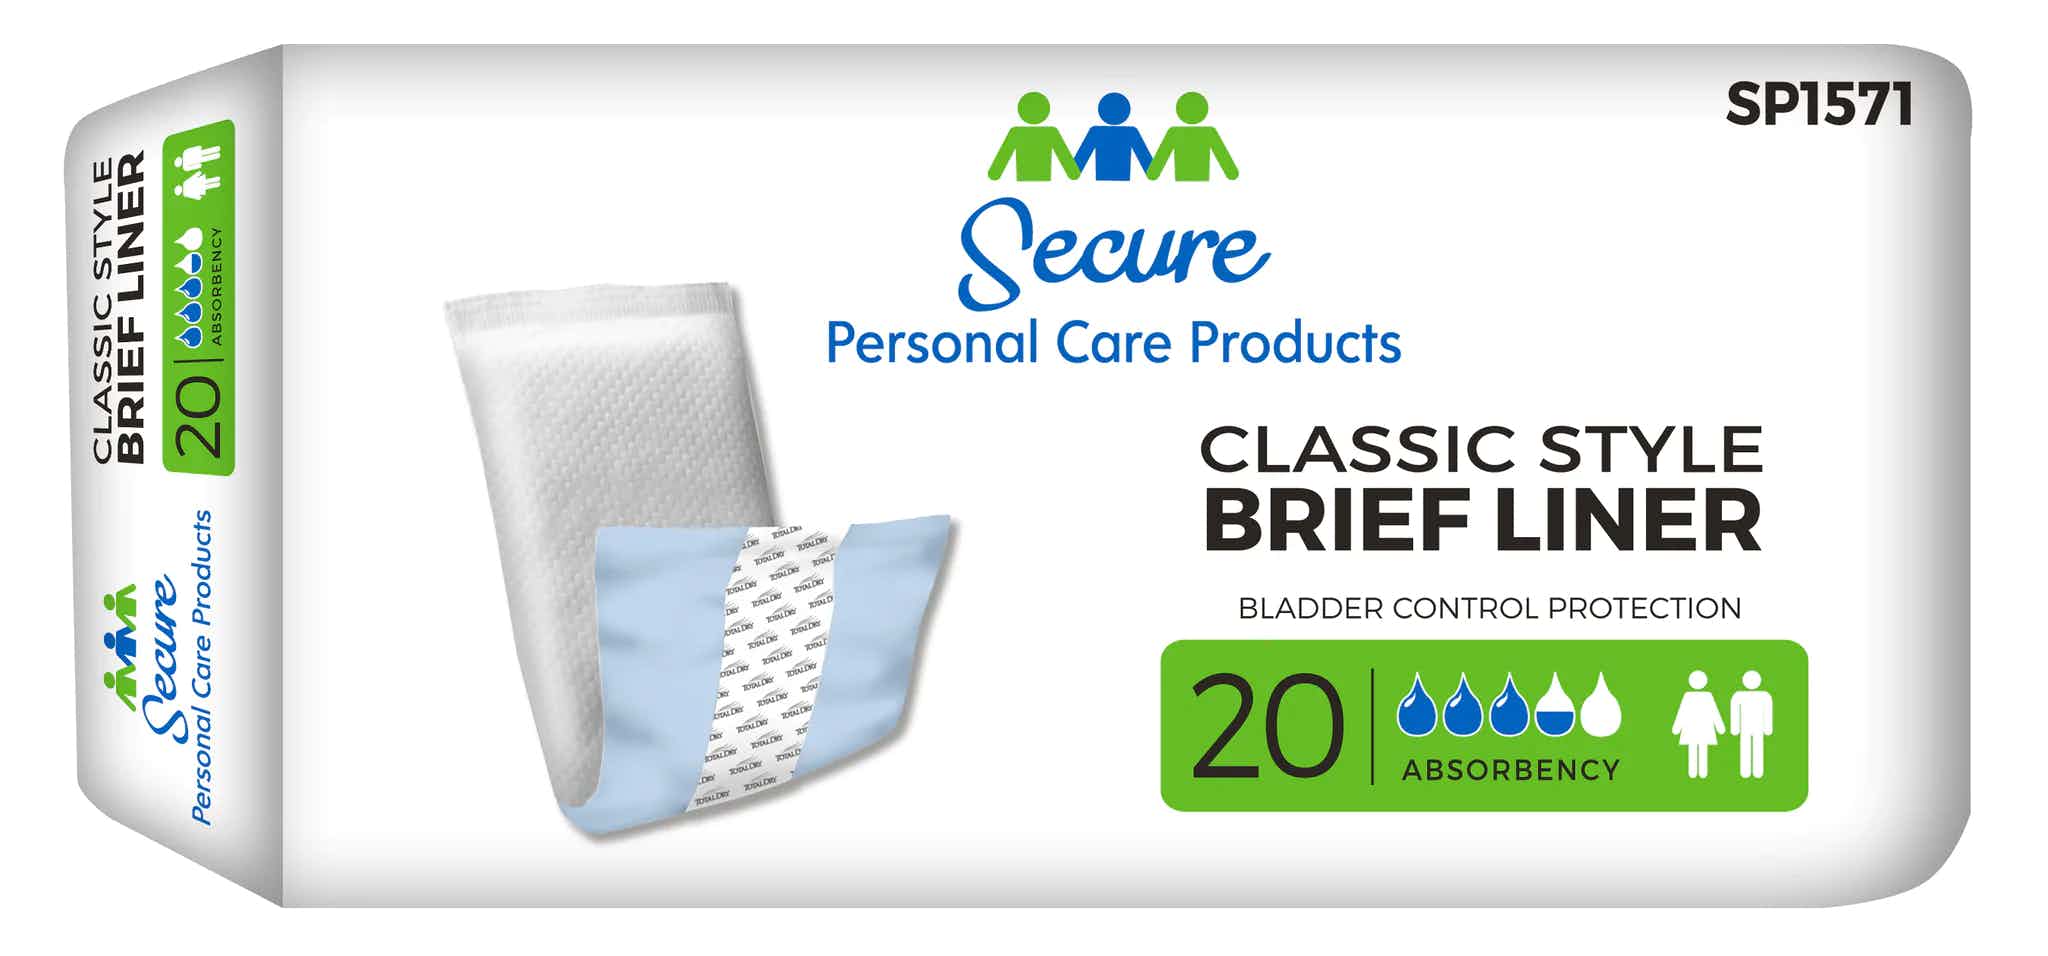 Secure Personal Care Products Classic Style Brief Liners, Moderate Absorbency,SP1571, Medium (4 X 13") - Bag of 20